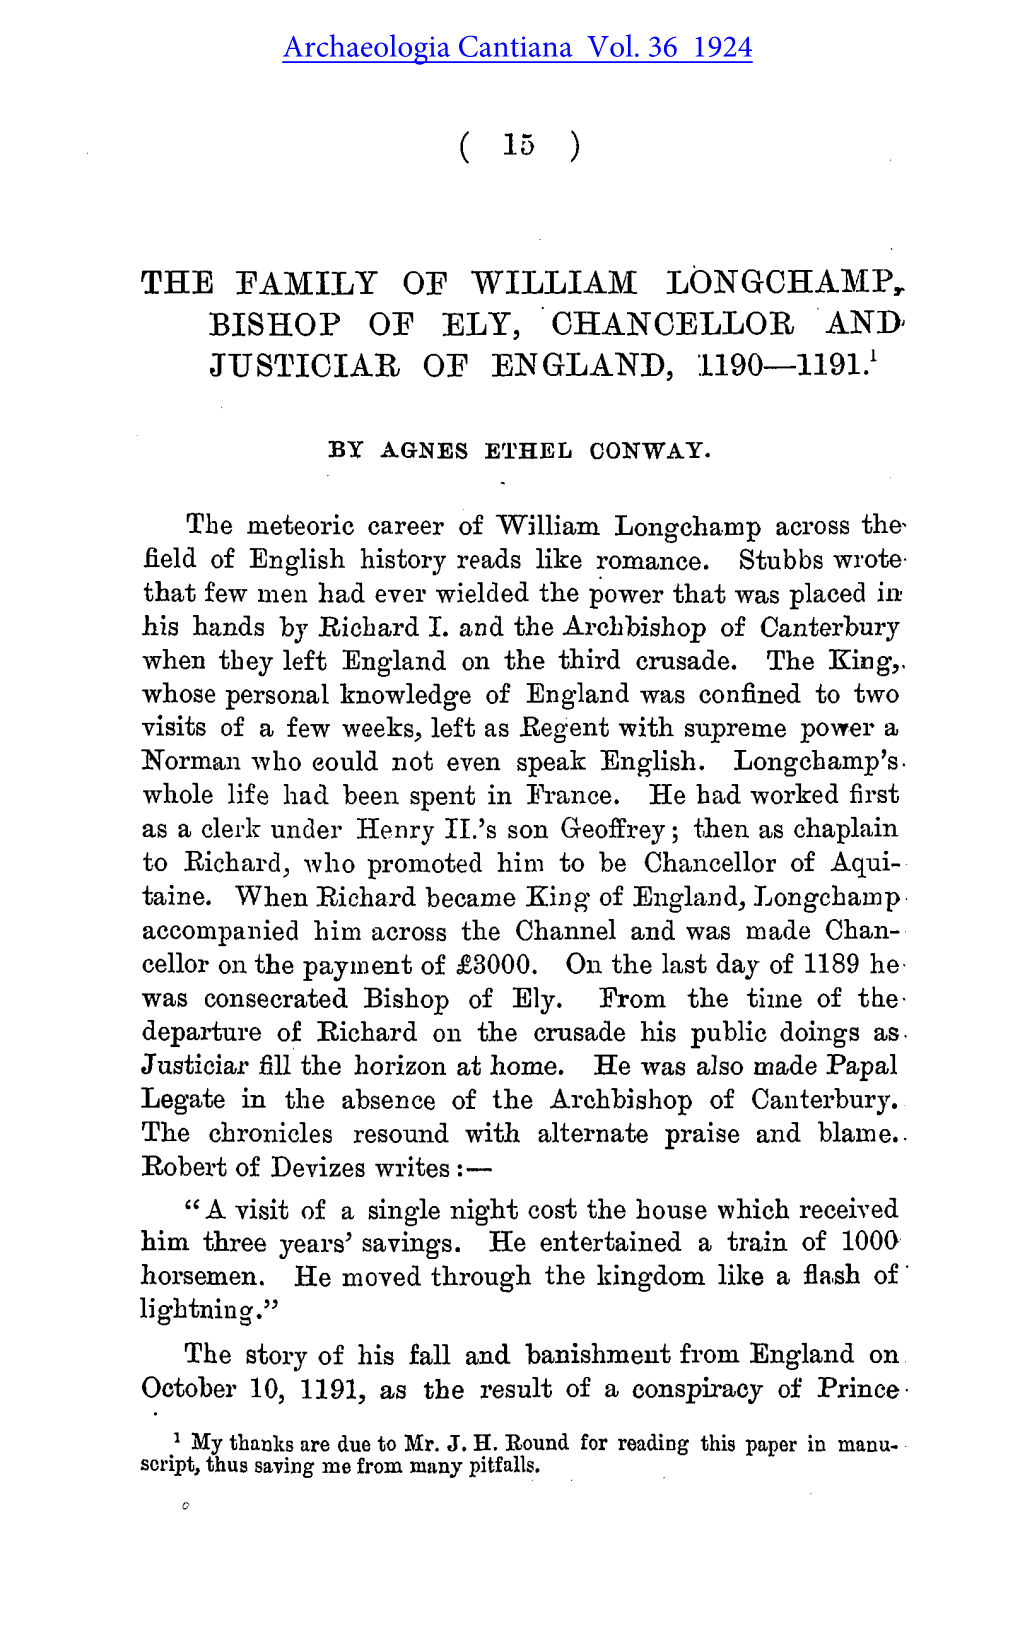 The Family of William Longchamp, Bishop of Ely, Chancellor And